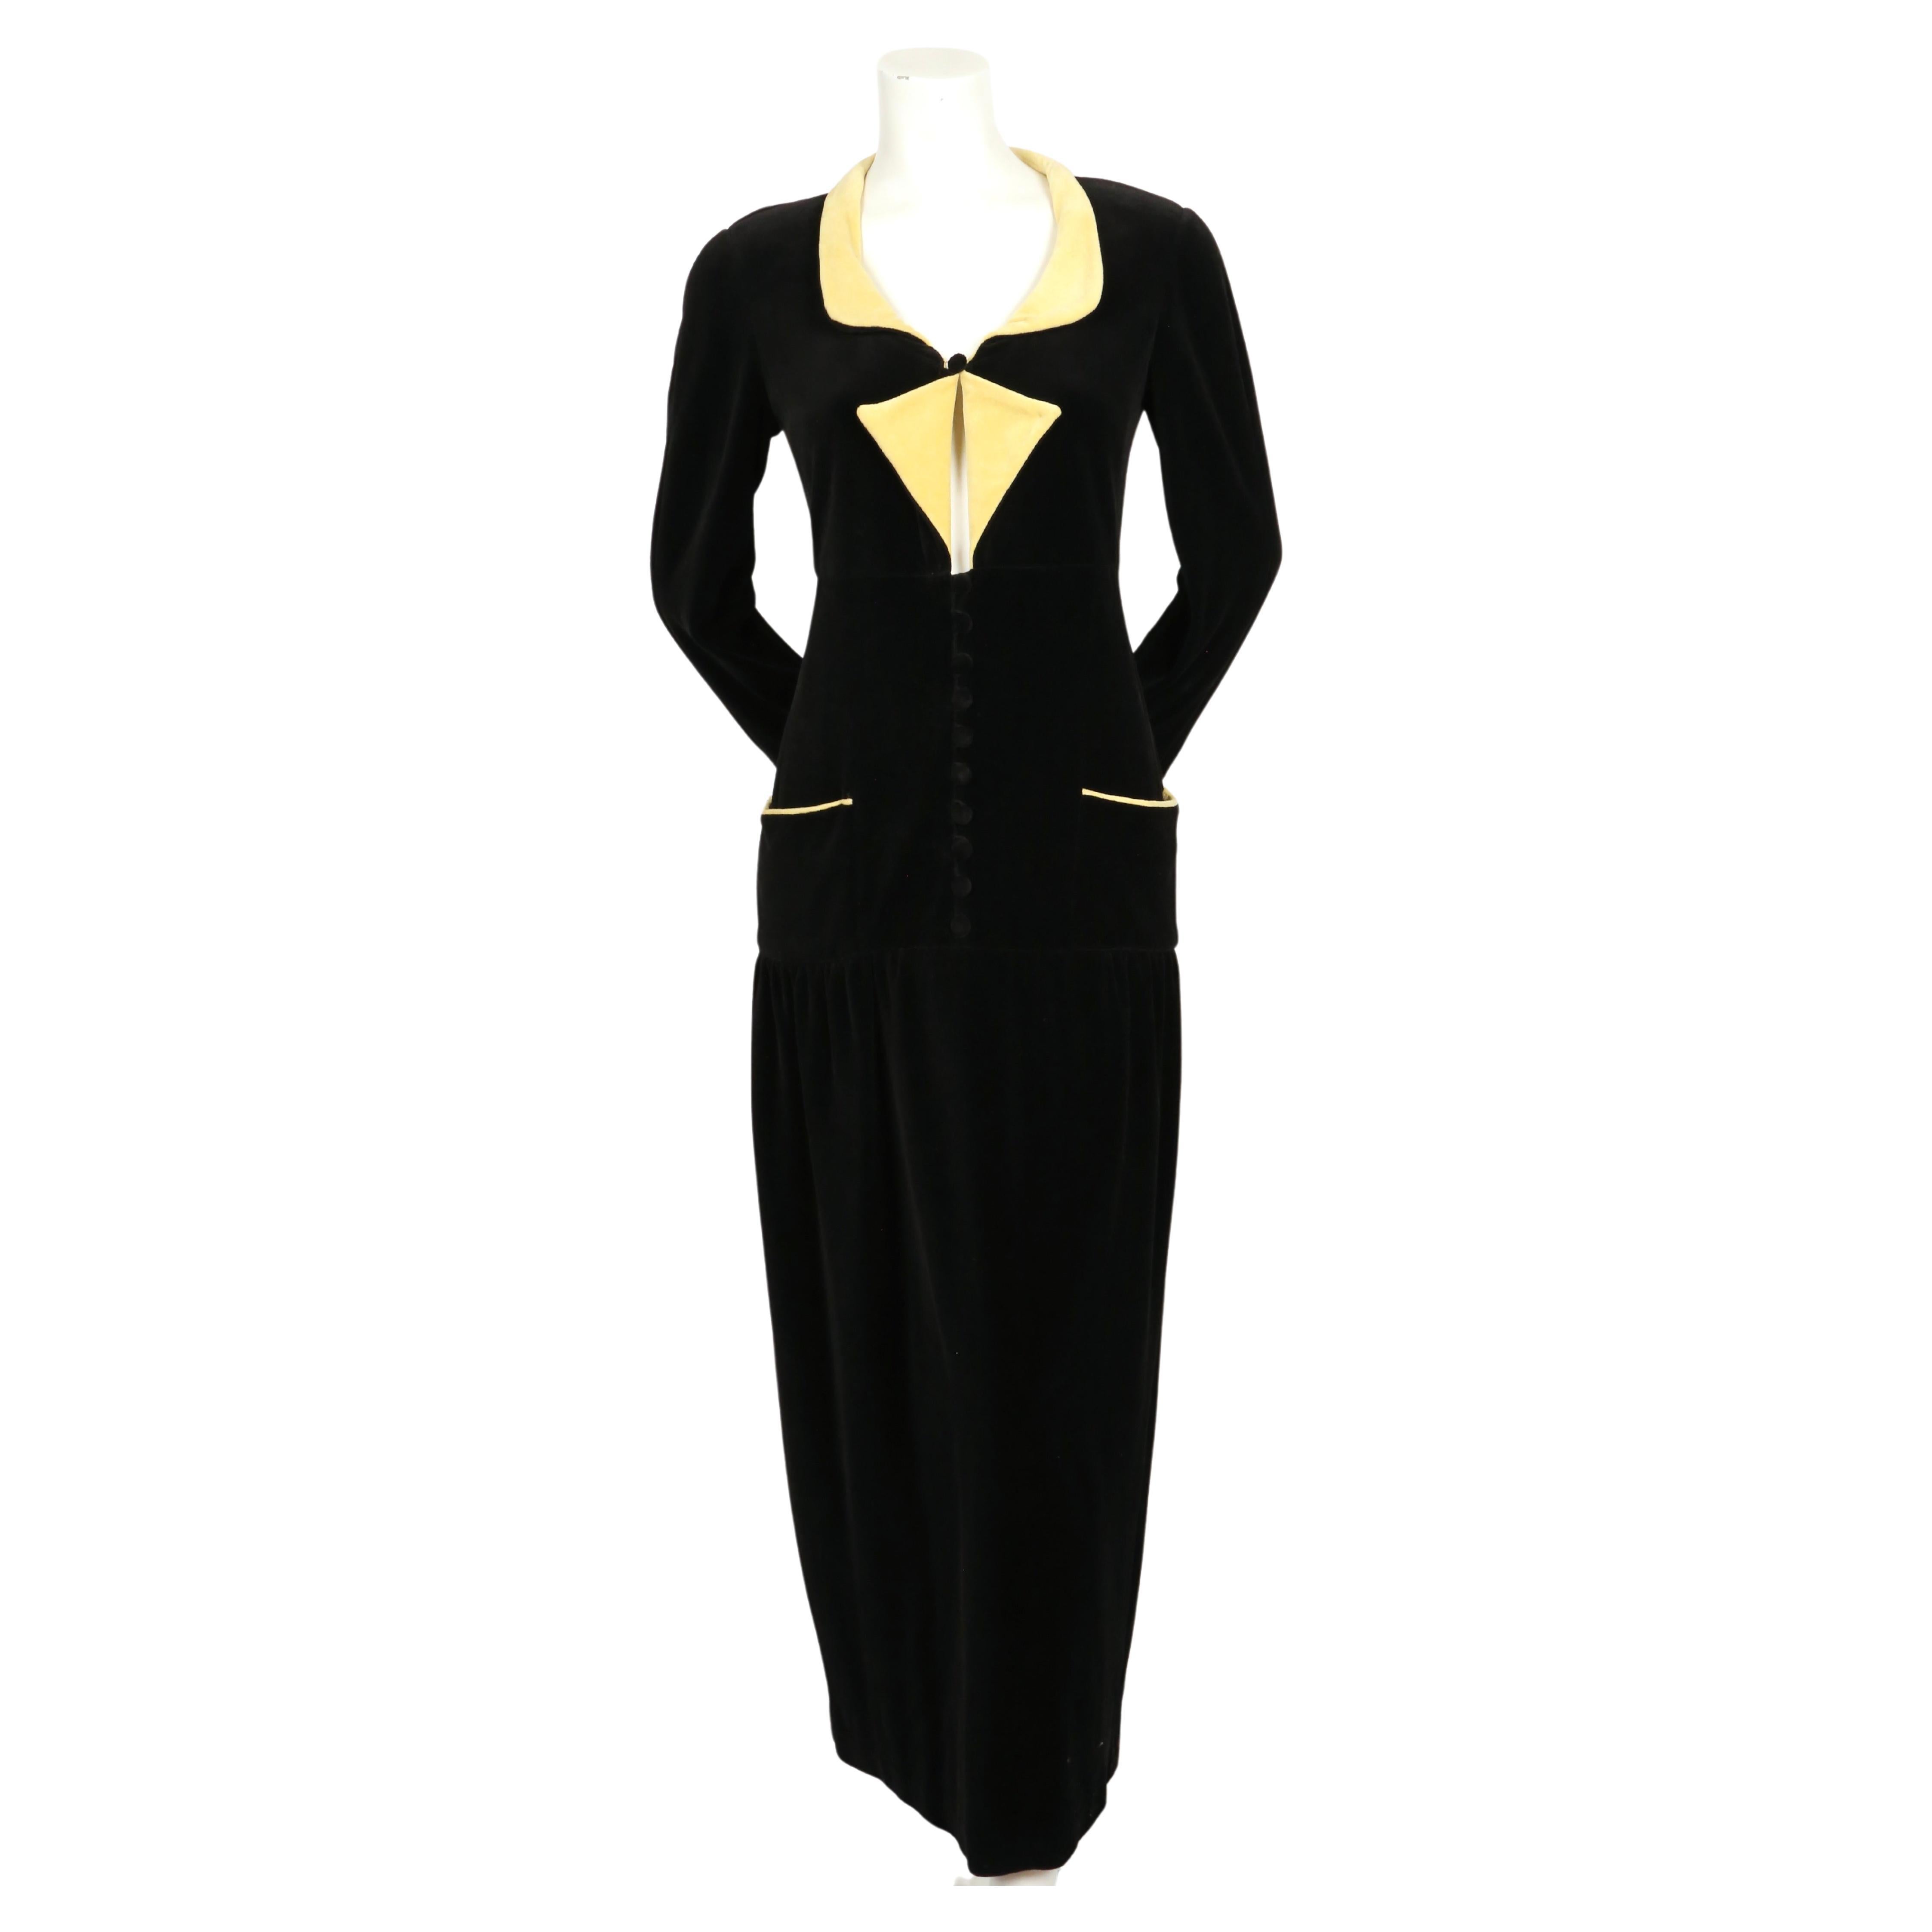 Very unique, 1940's style jet-black velvet dress with yellow accents designed by Karl Lagerfeld for Chloe dating to fall of 1993 exactly as seen on the runway worn by Yasmin Le Bon in an alternate color-way. Dress is labeled a French size 38.